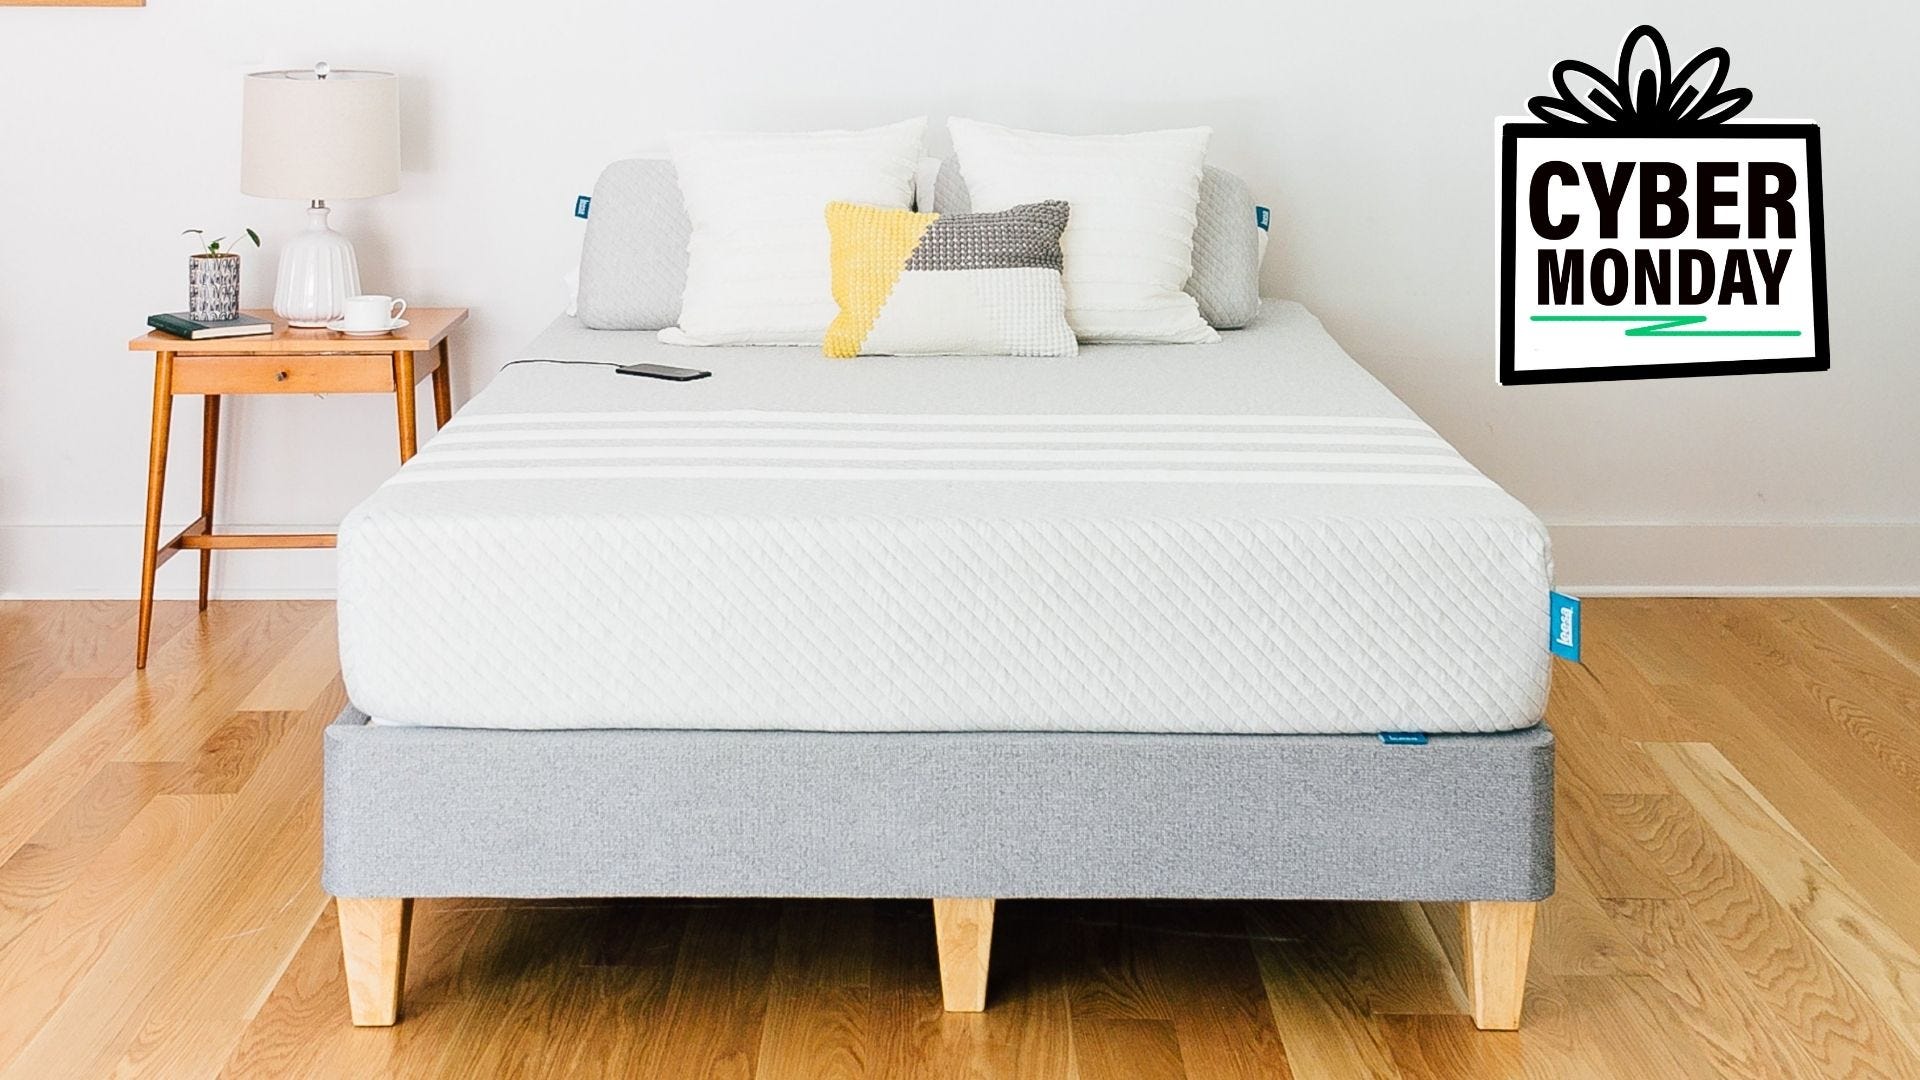 The best mattress-in-a-box brand we've tested is offering up to $600 off for Cyber Monday